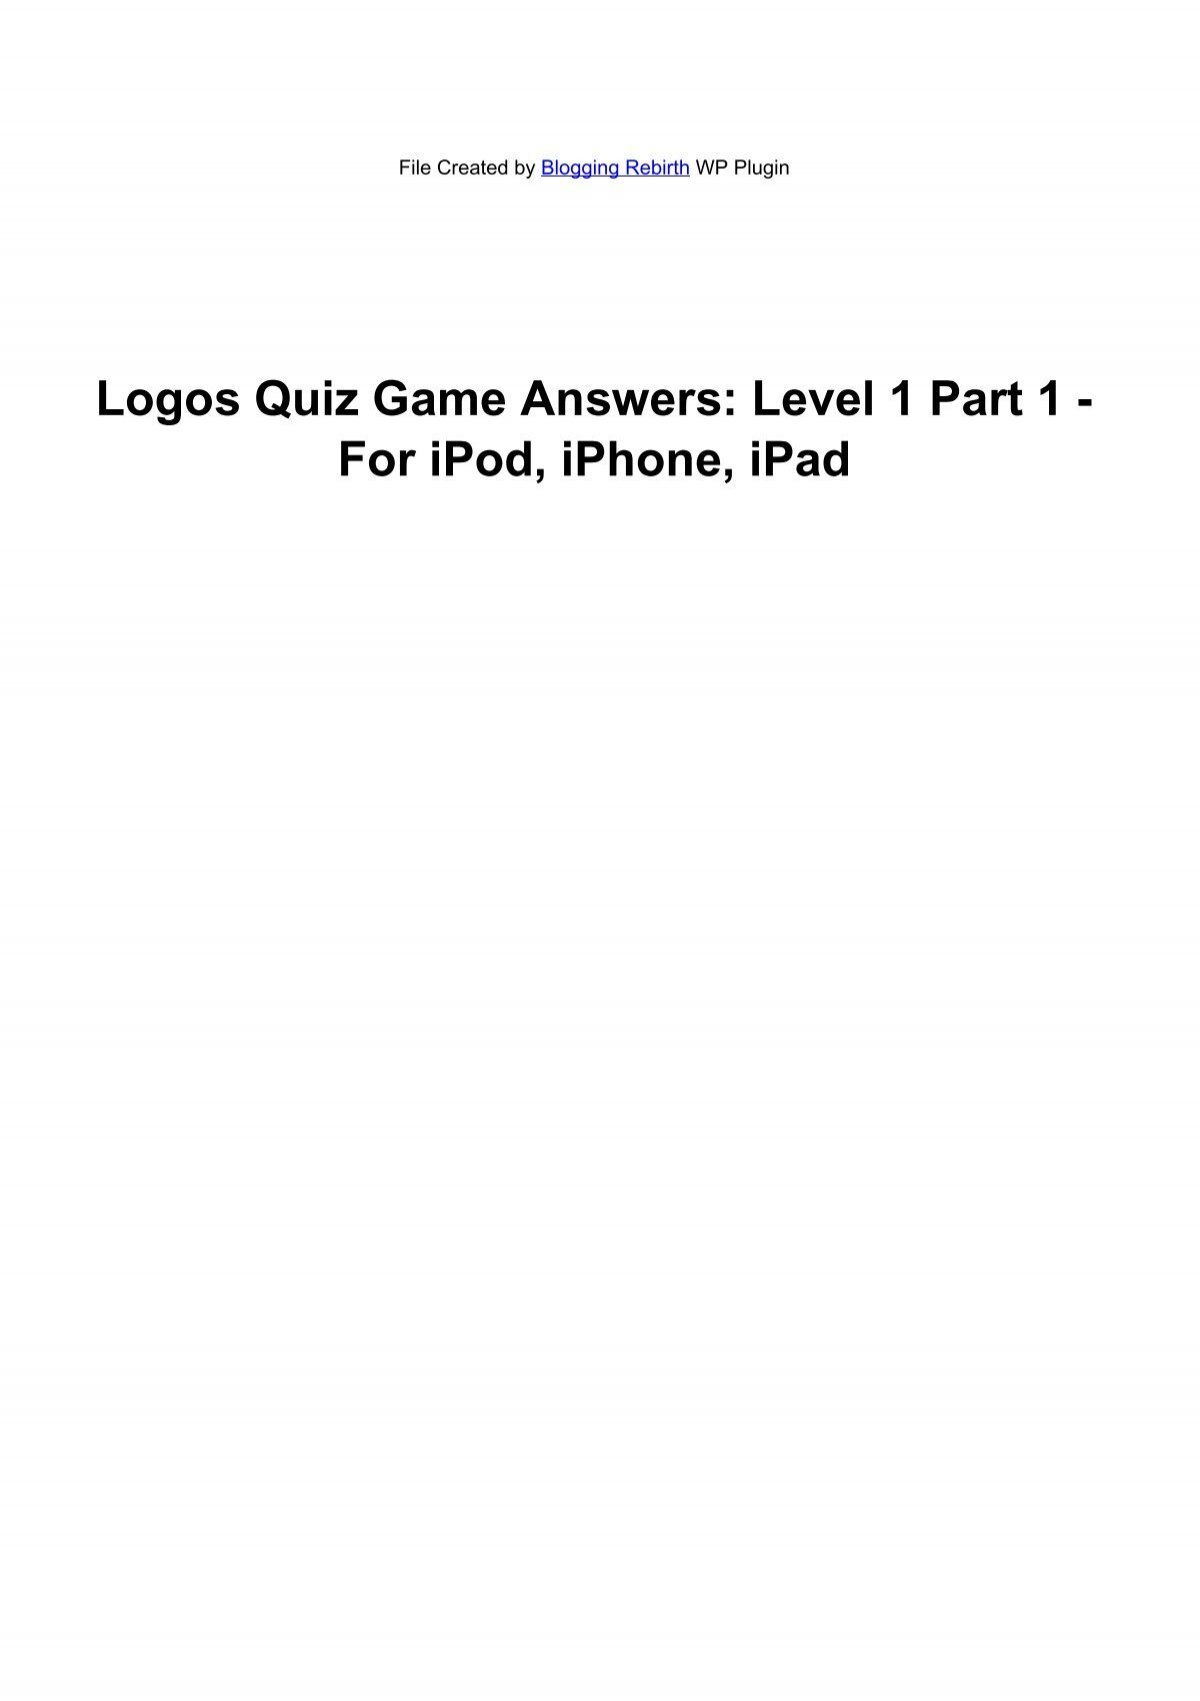 logos quiz answers level 1 for iphone